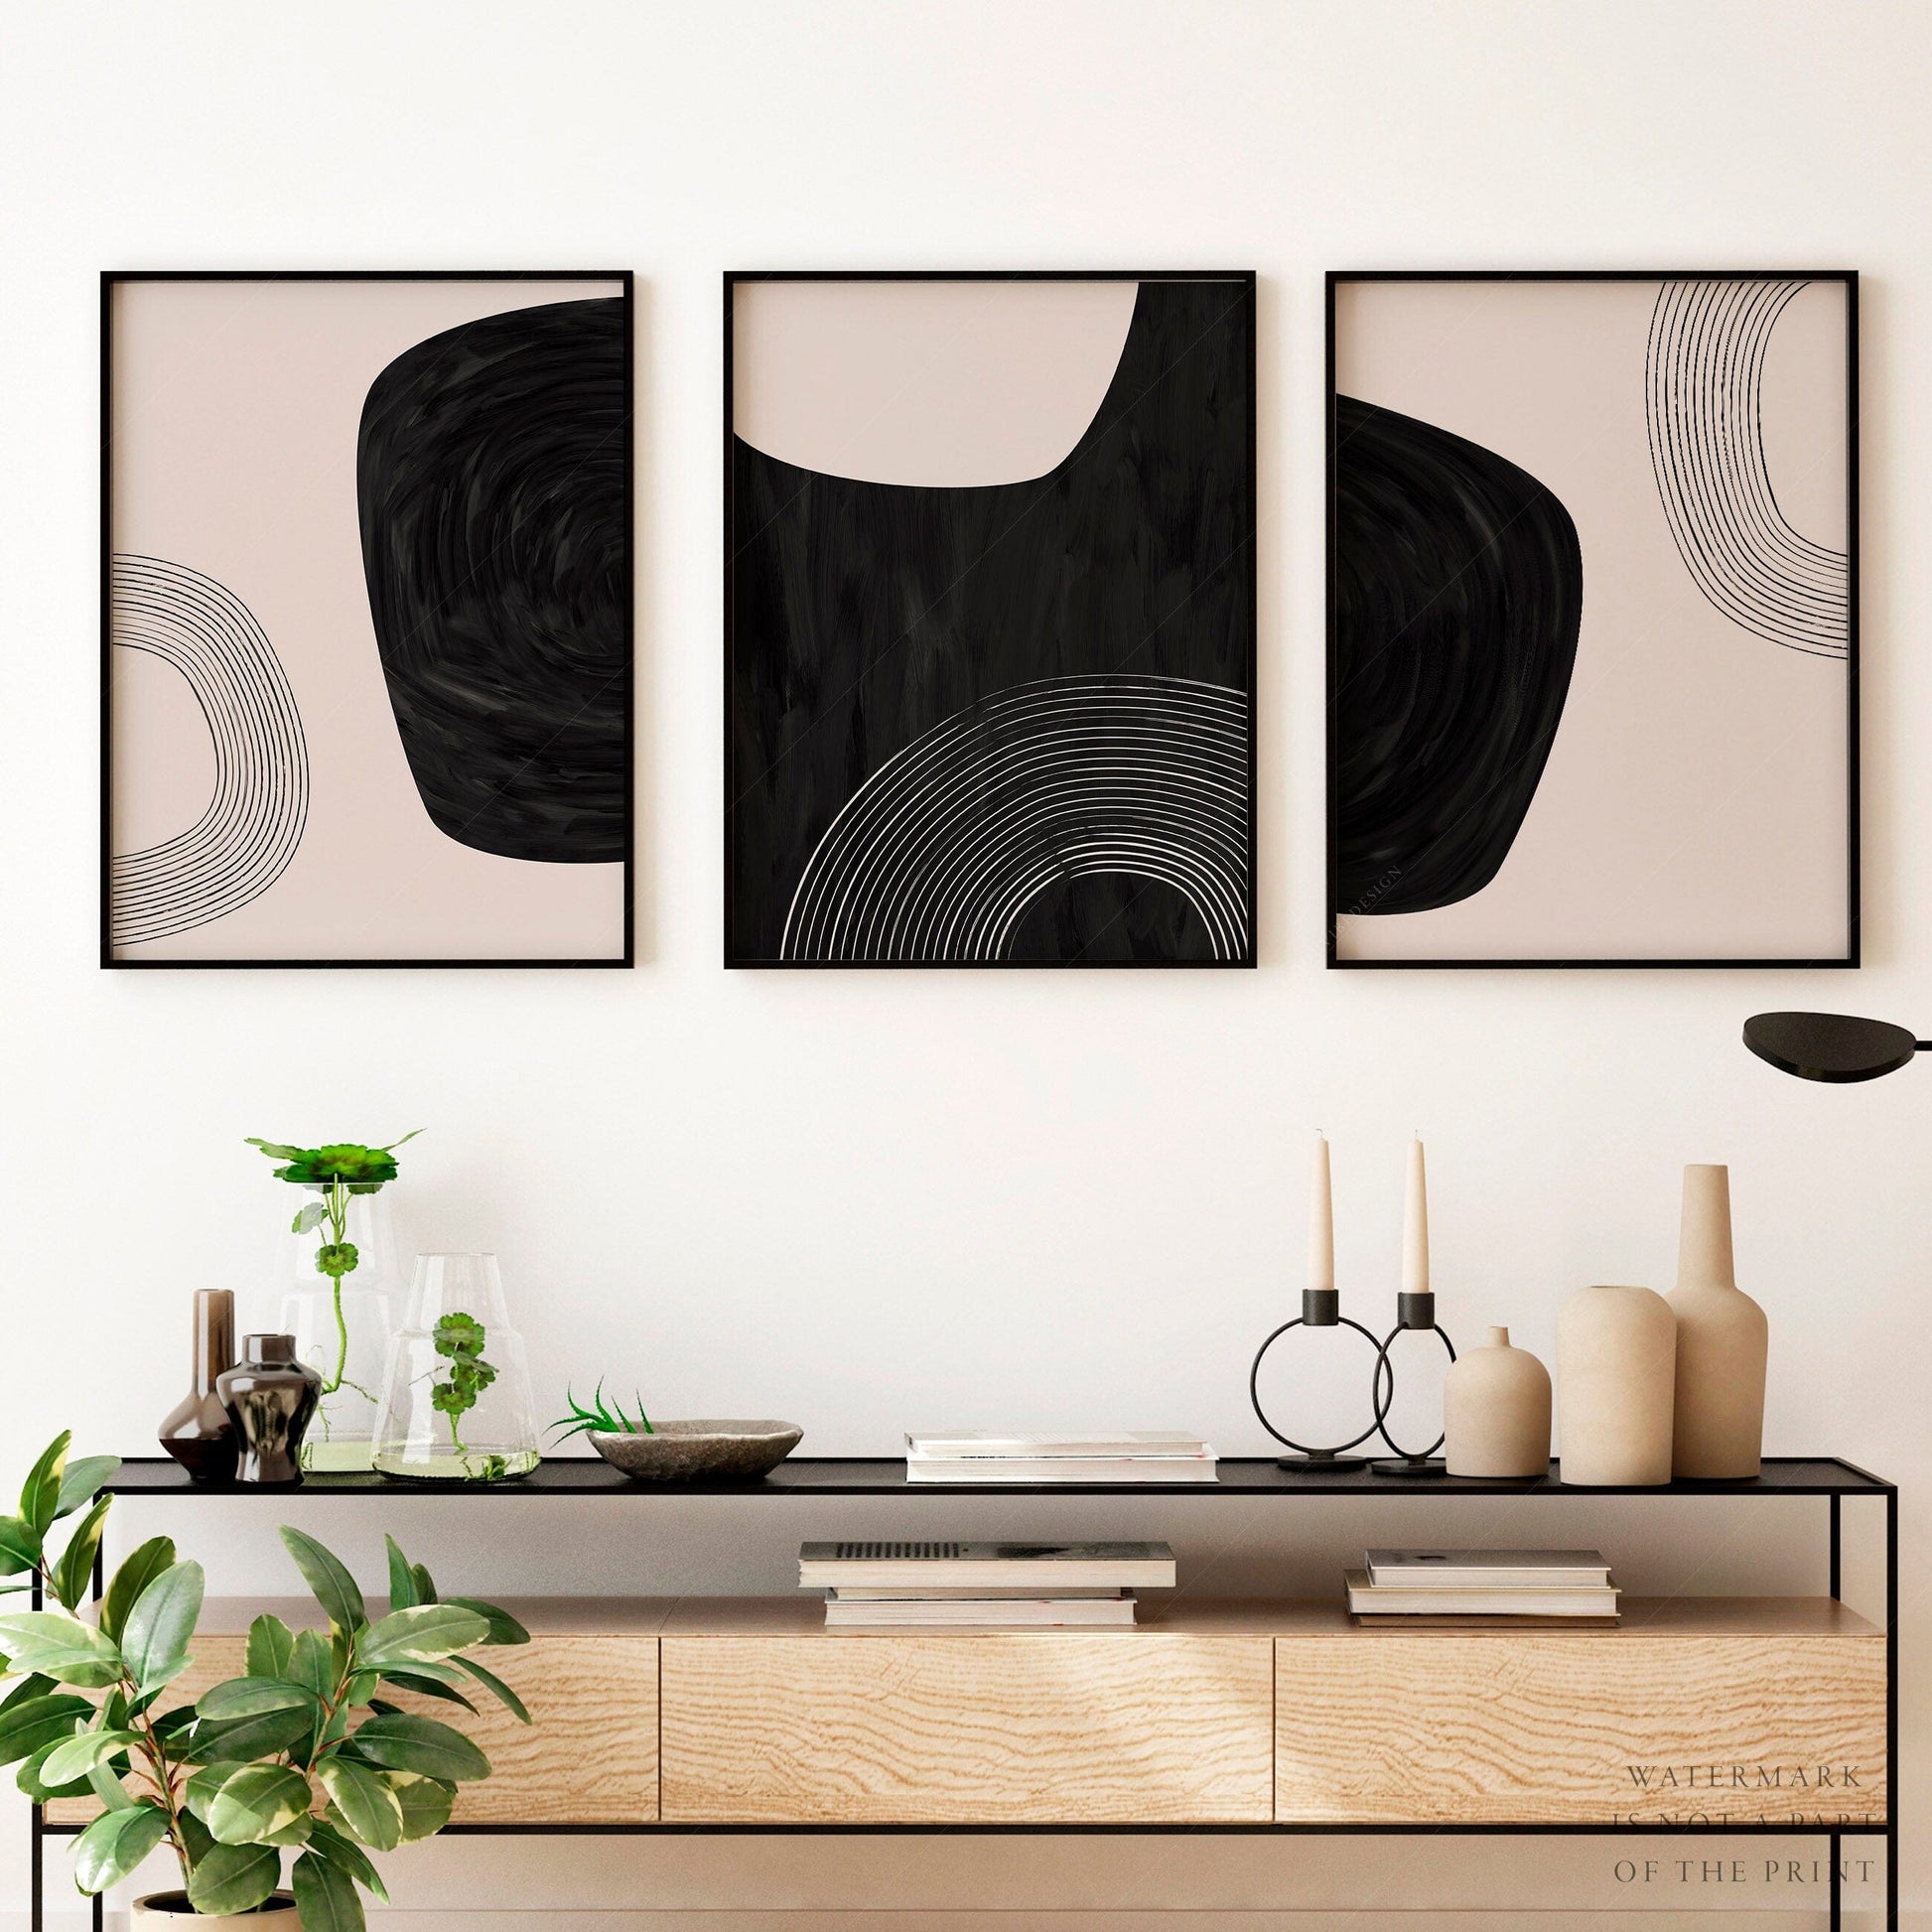 Home Poster Decor Single Modern Set of 3 Art, Neutral Tones, Beige Black Minimalist, Gallery Wall, Abstract Wall Art, Simple Shapes, Line Print, Living Wall Decor 10